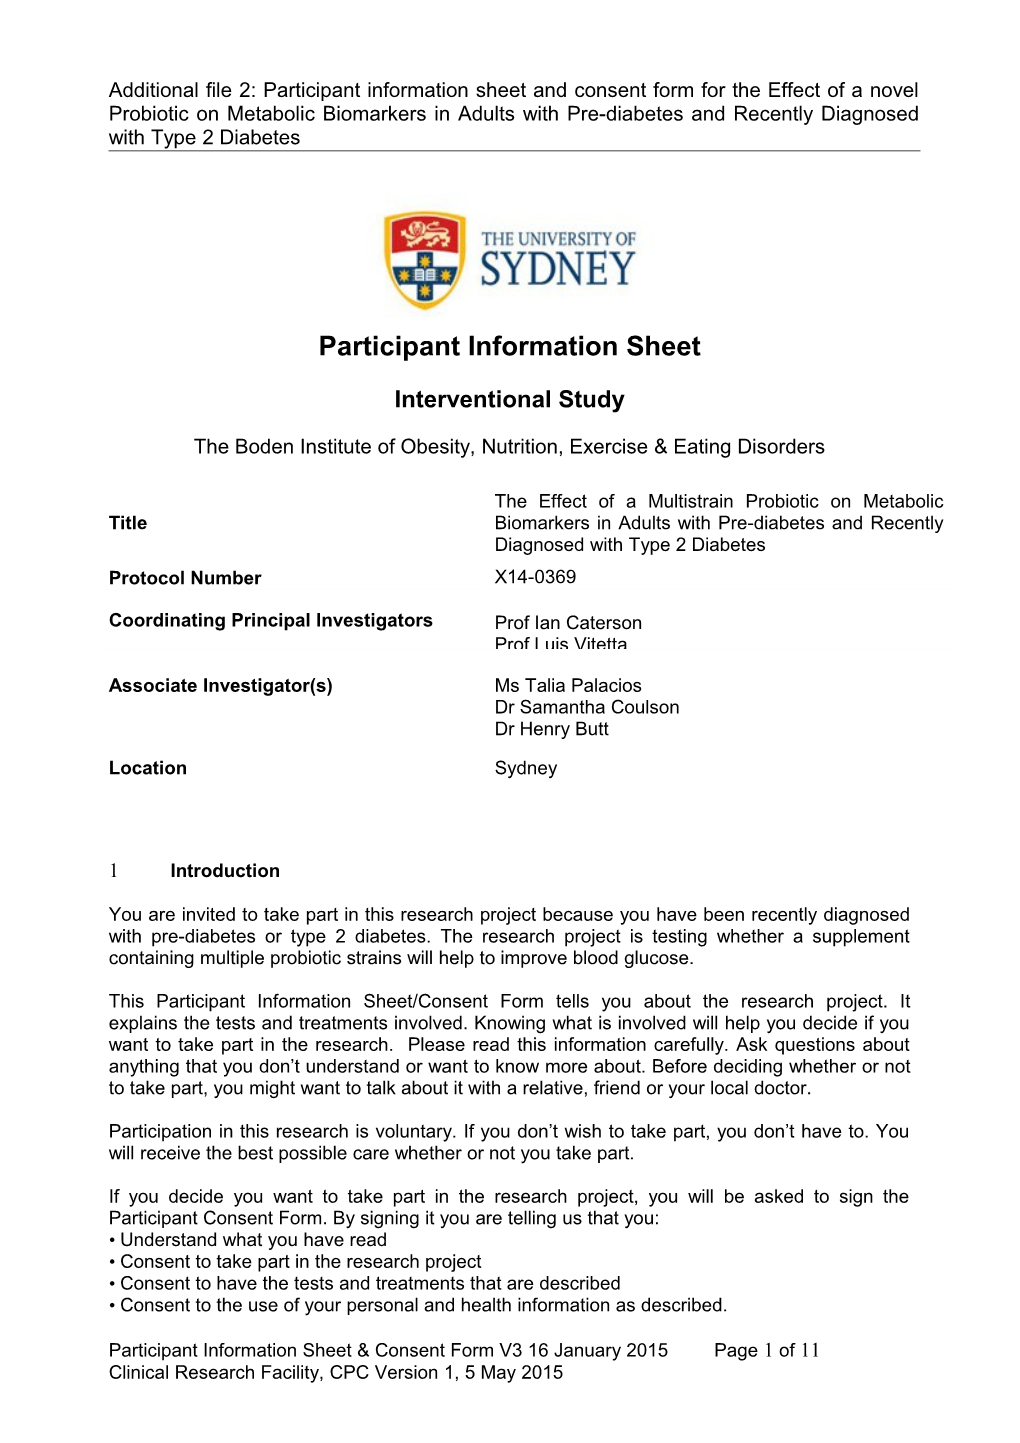 Participant Information Sheet and Consent Form Guidance Document for an Interventional Study